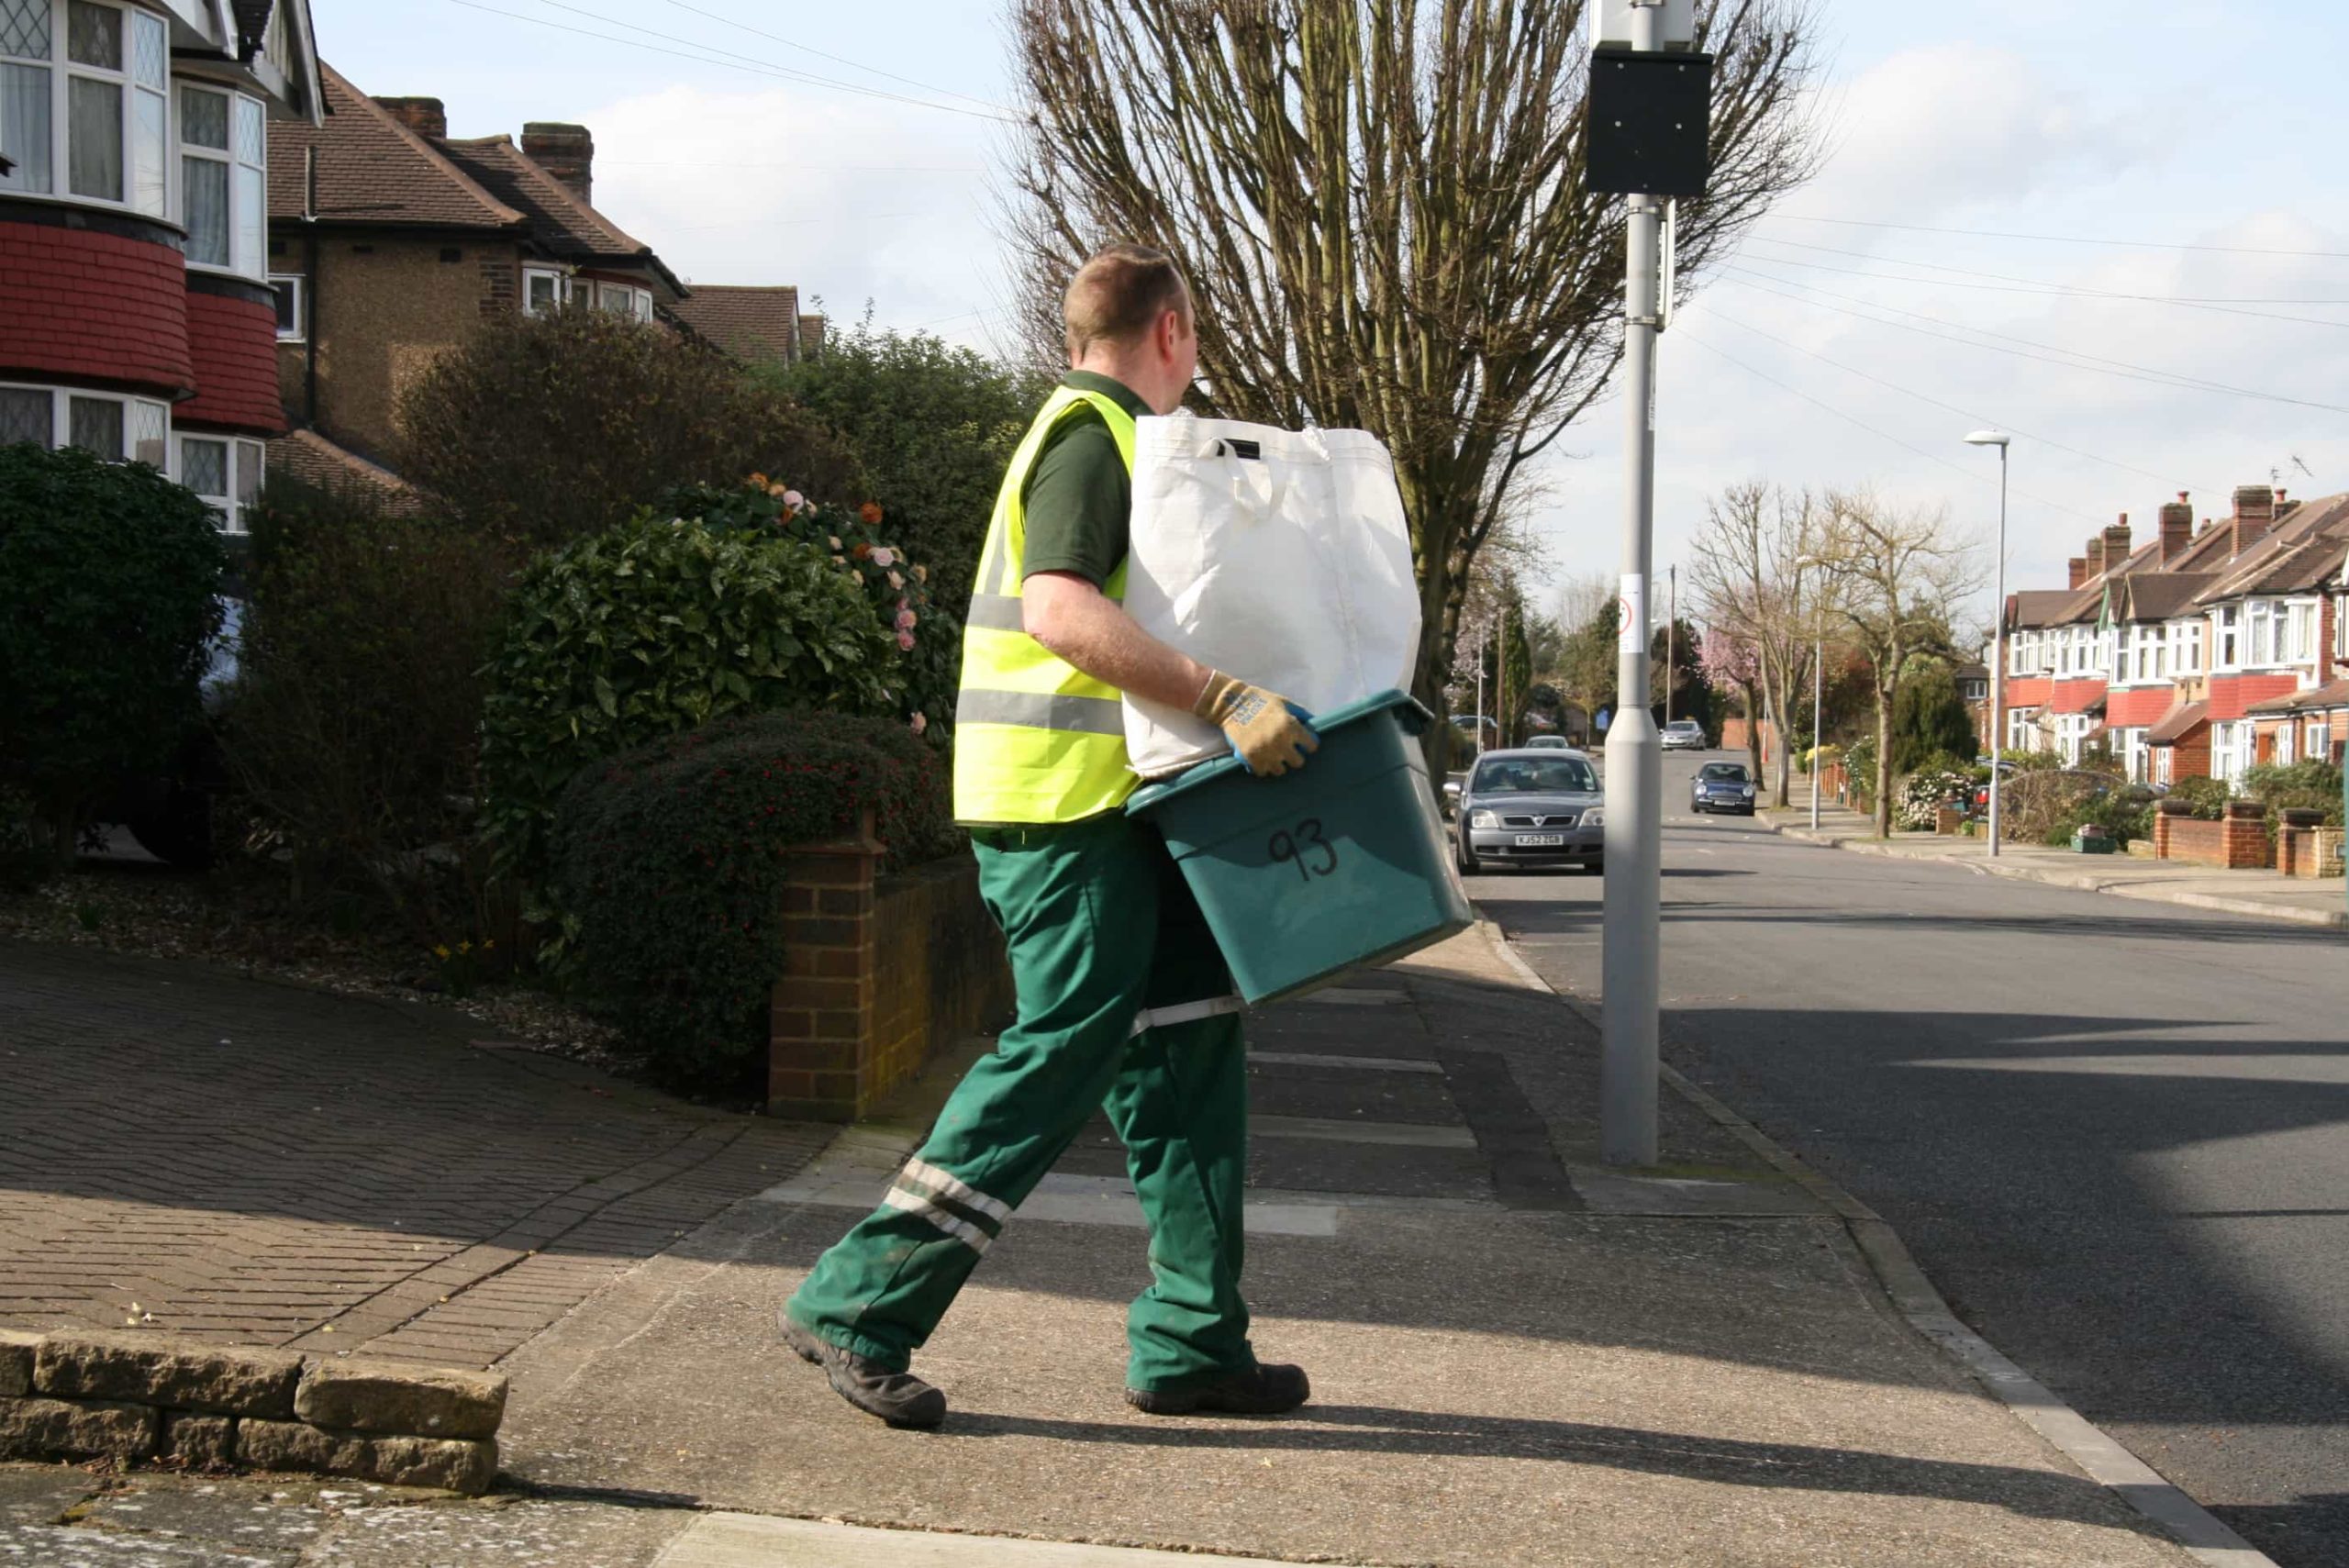 Progress towards the 50% recycling target in England remains slow